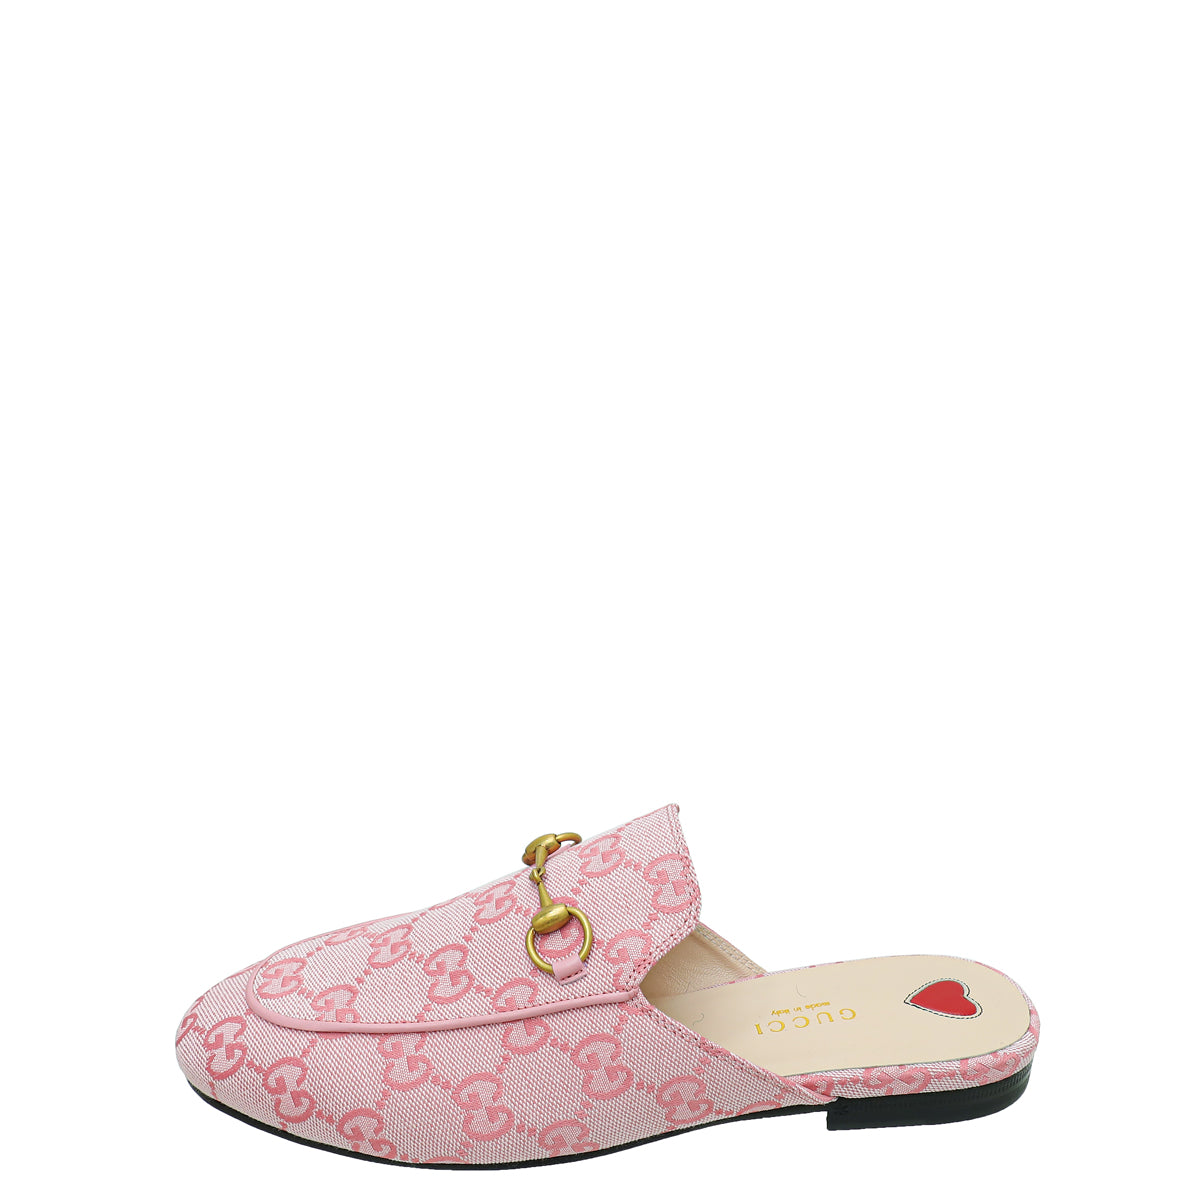 Gucci Pink GG Princetown Mules 37.5